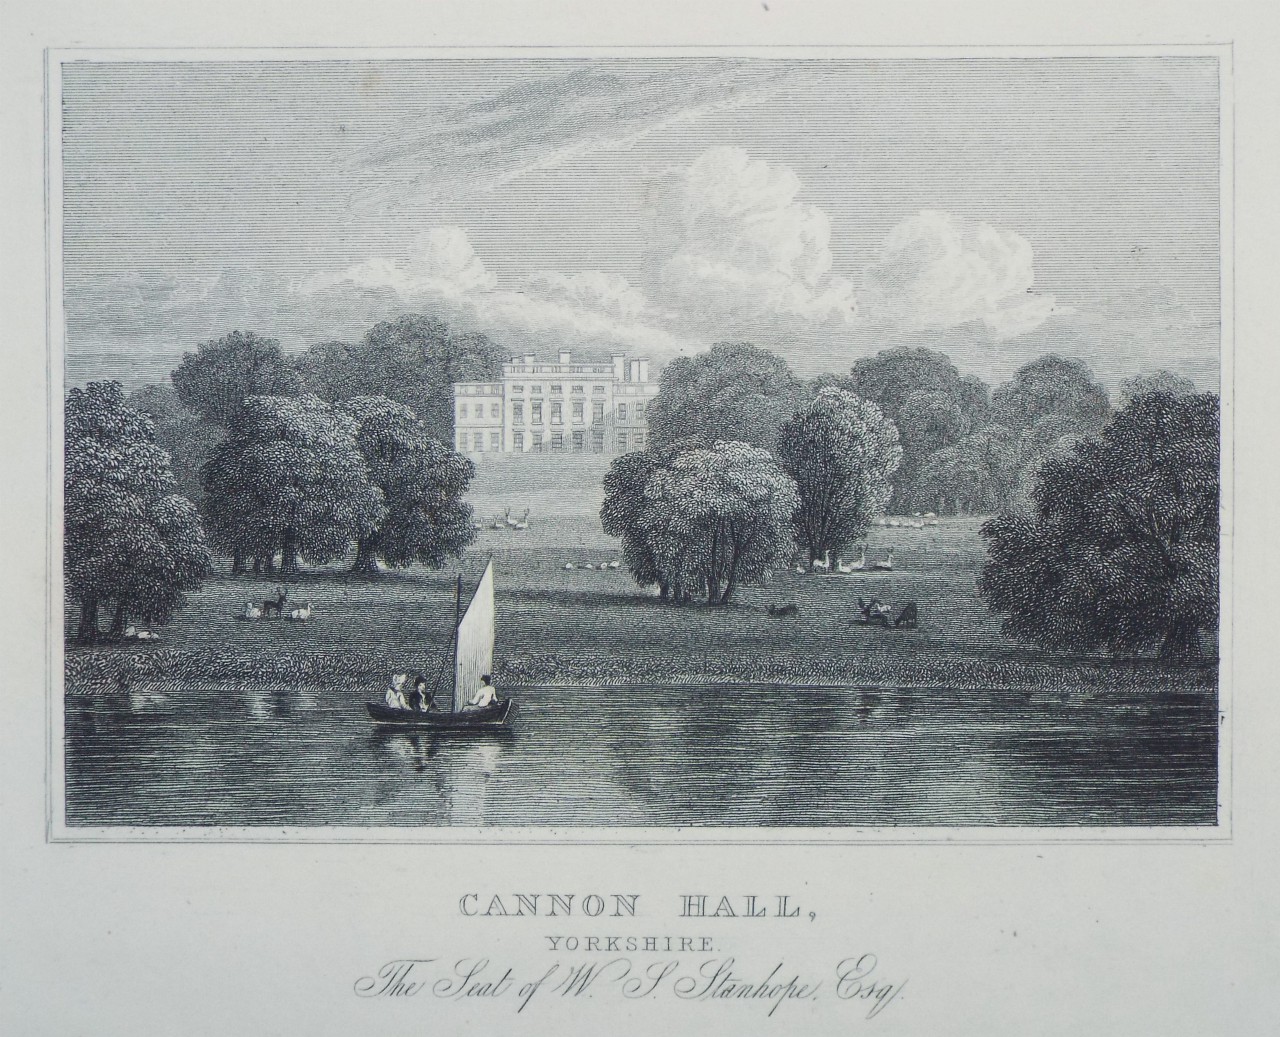 Print - Cannon Hall, Yorkshire. The Seat of W. S. Stanhope, Esq. - Hay